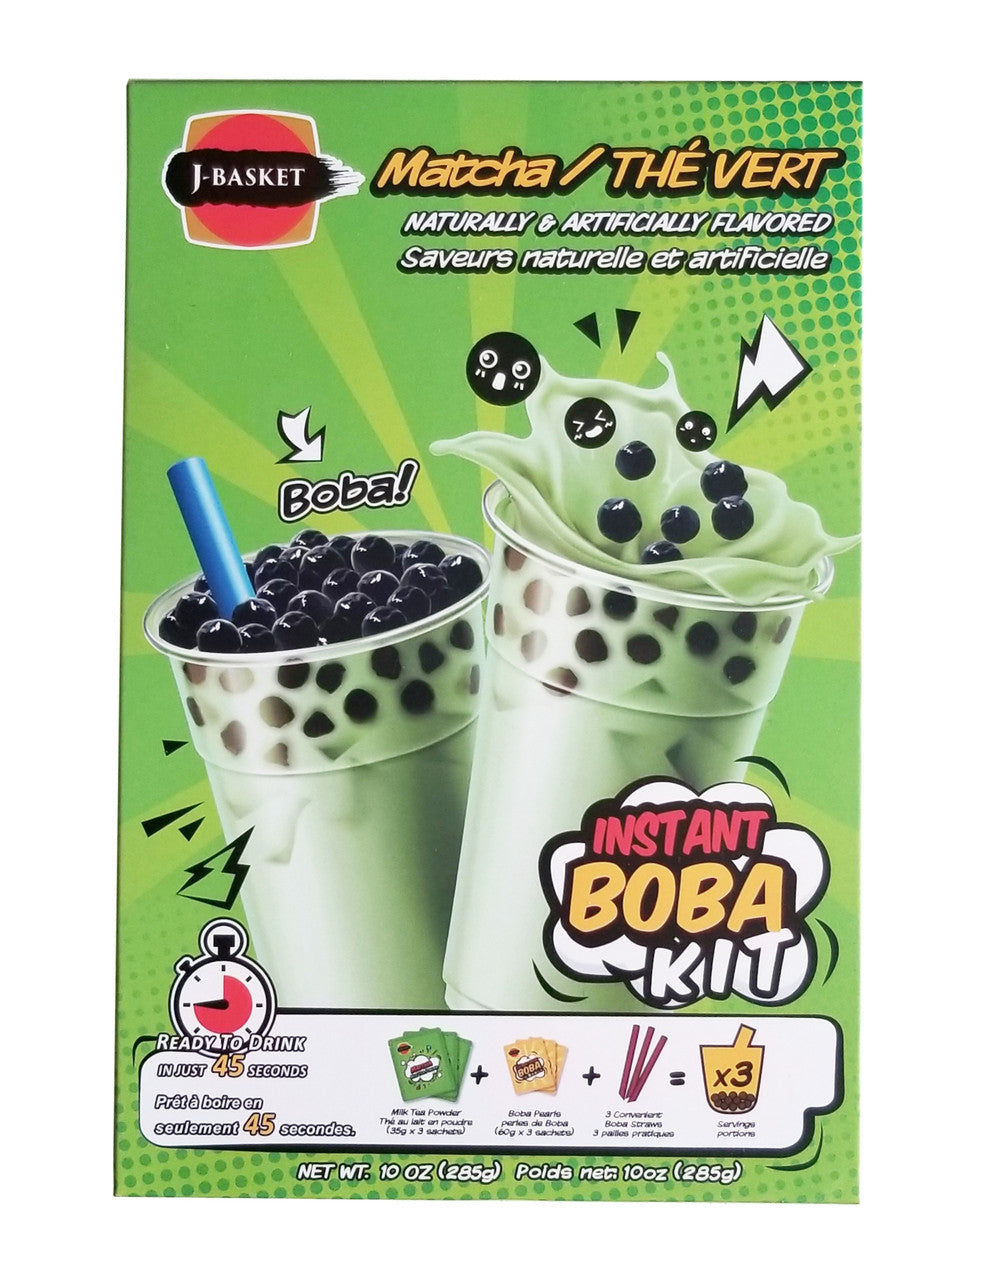 J-Basket Instant Boba Kit, Matcha Flavor, 285g/10 oz. Box {Imported from Canada}